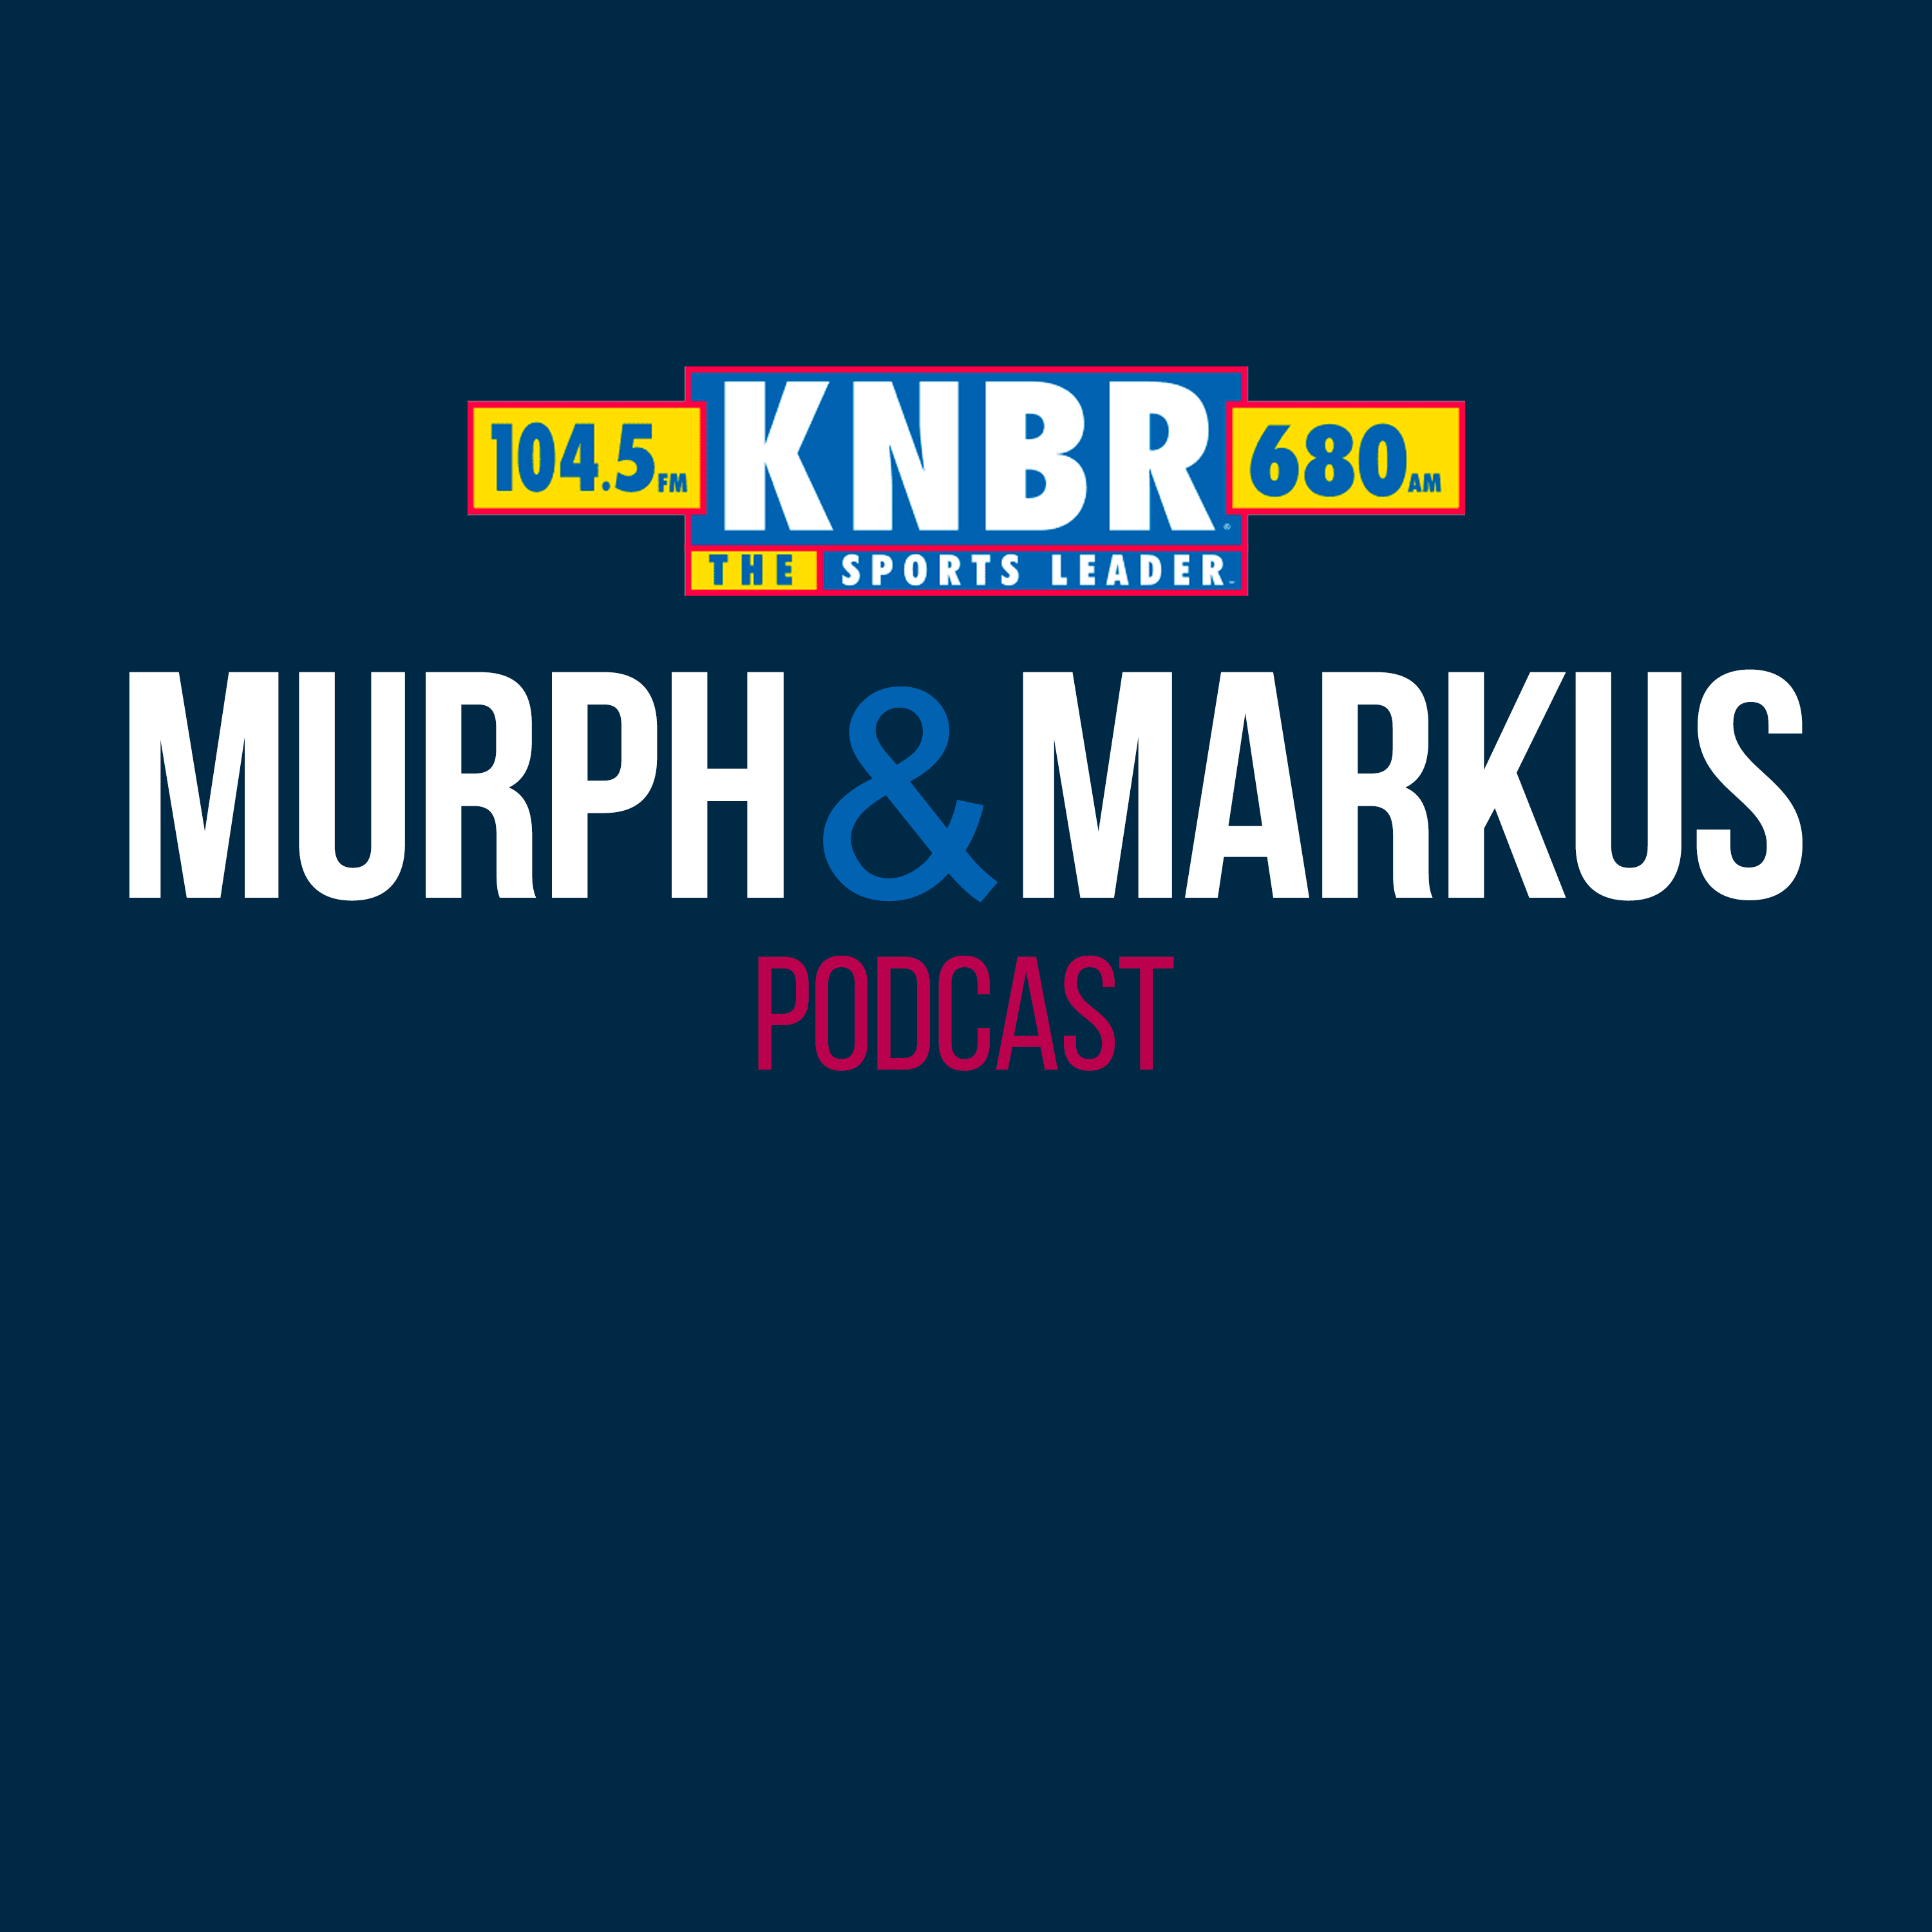 7-25 Susan Slusser joins Murph and Markus to break down whether or not the Giants can make a playoff push after Robbie Ray's impressive debut